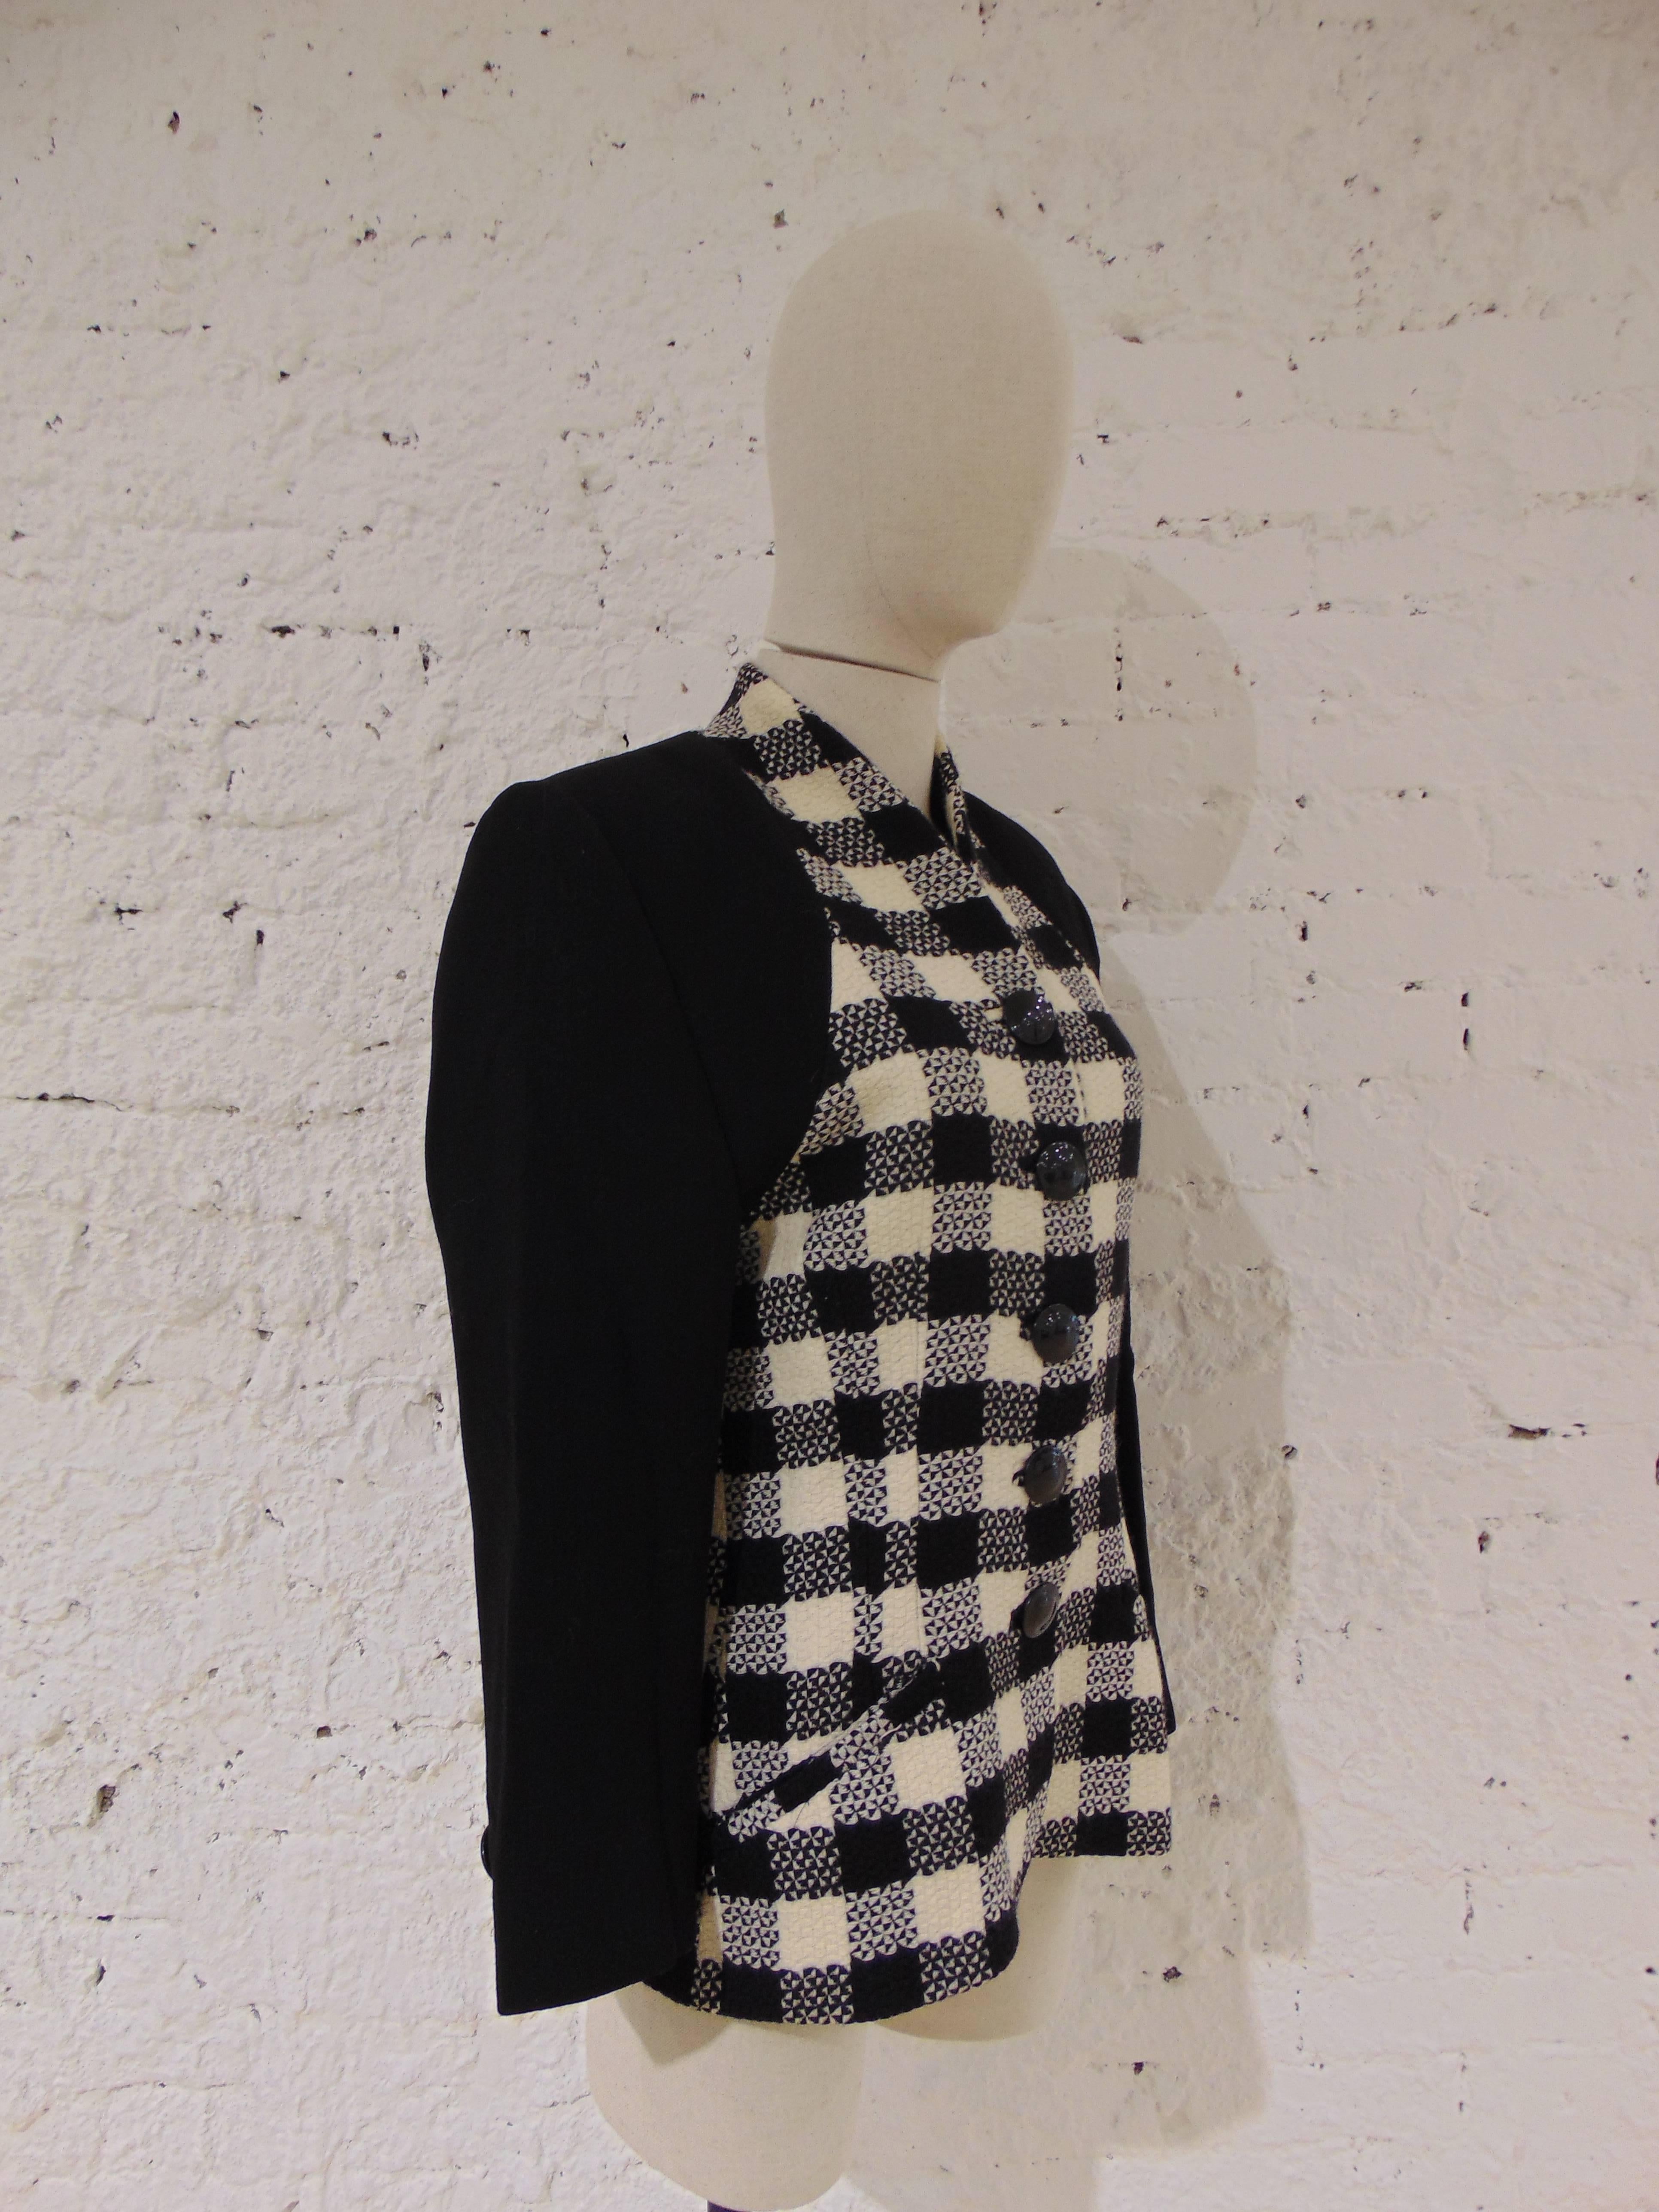 Roccobarocco black white wool jacket
totally made in italy in size 48
lining: Viscose